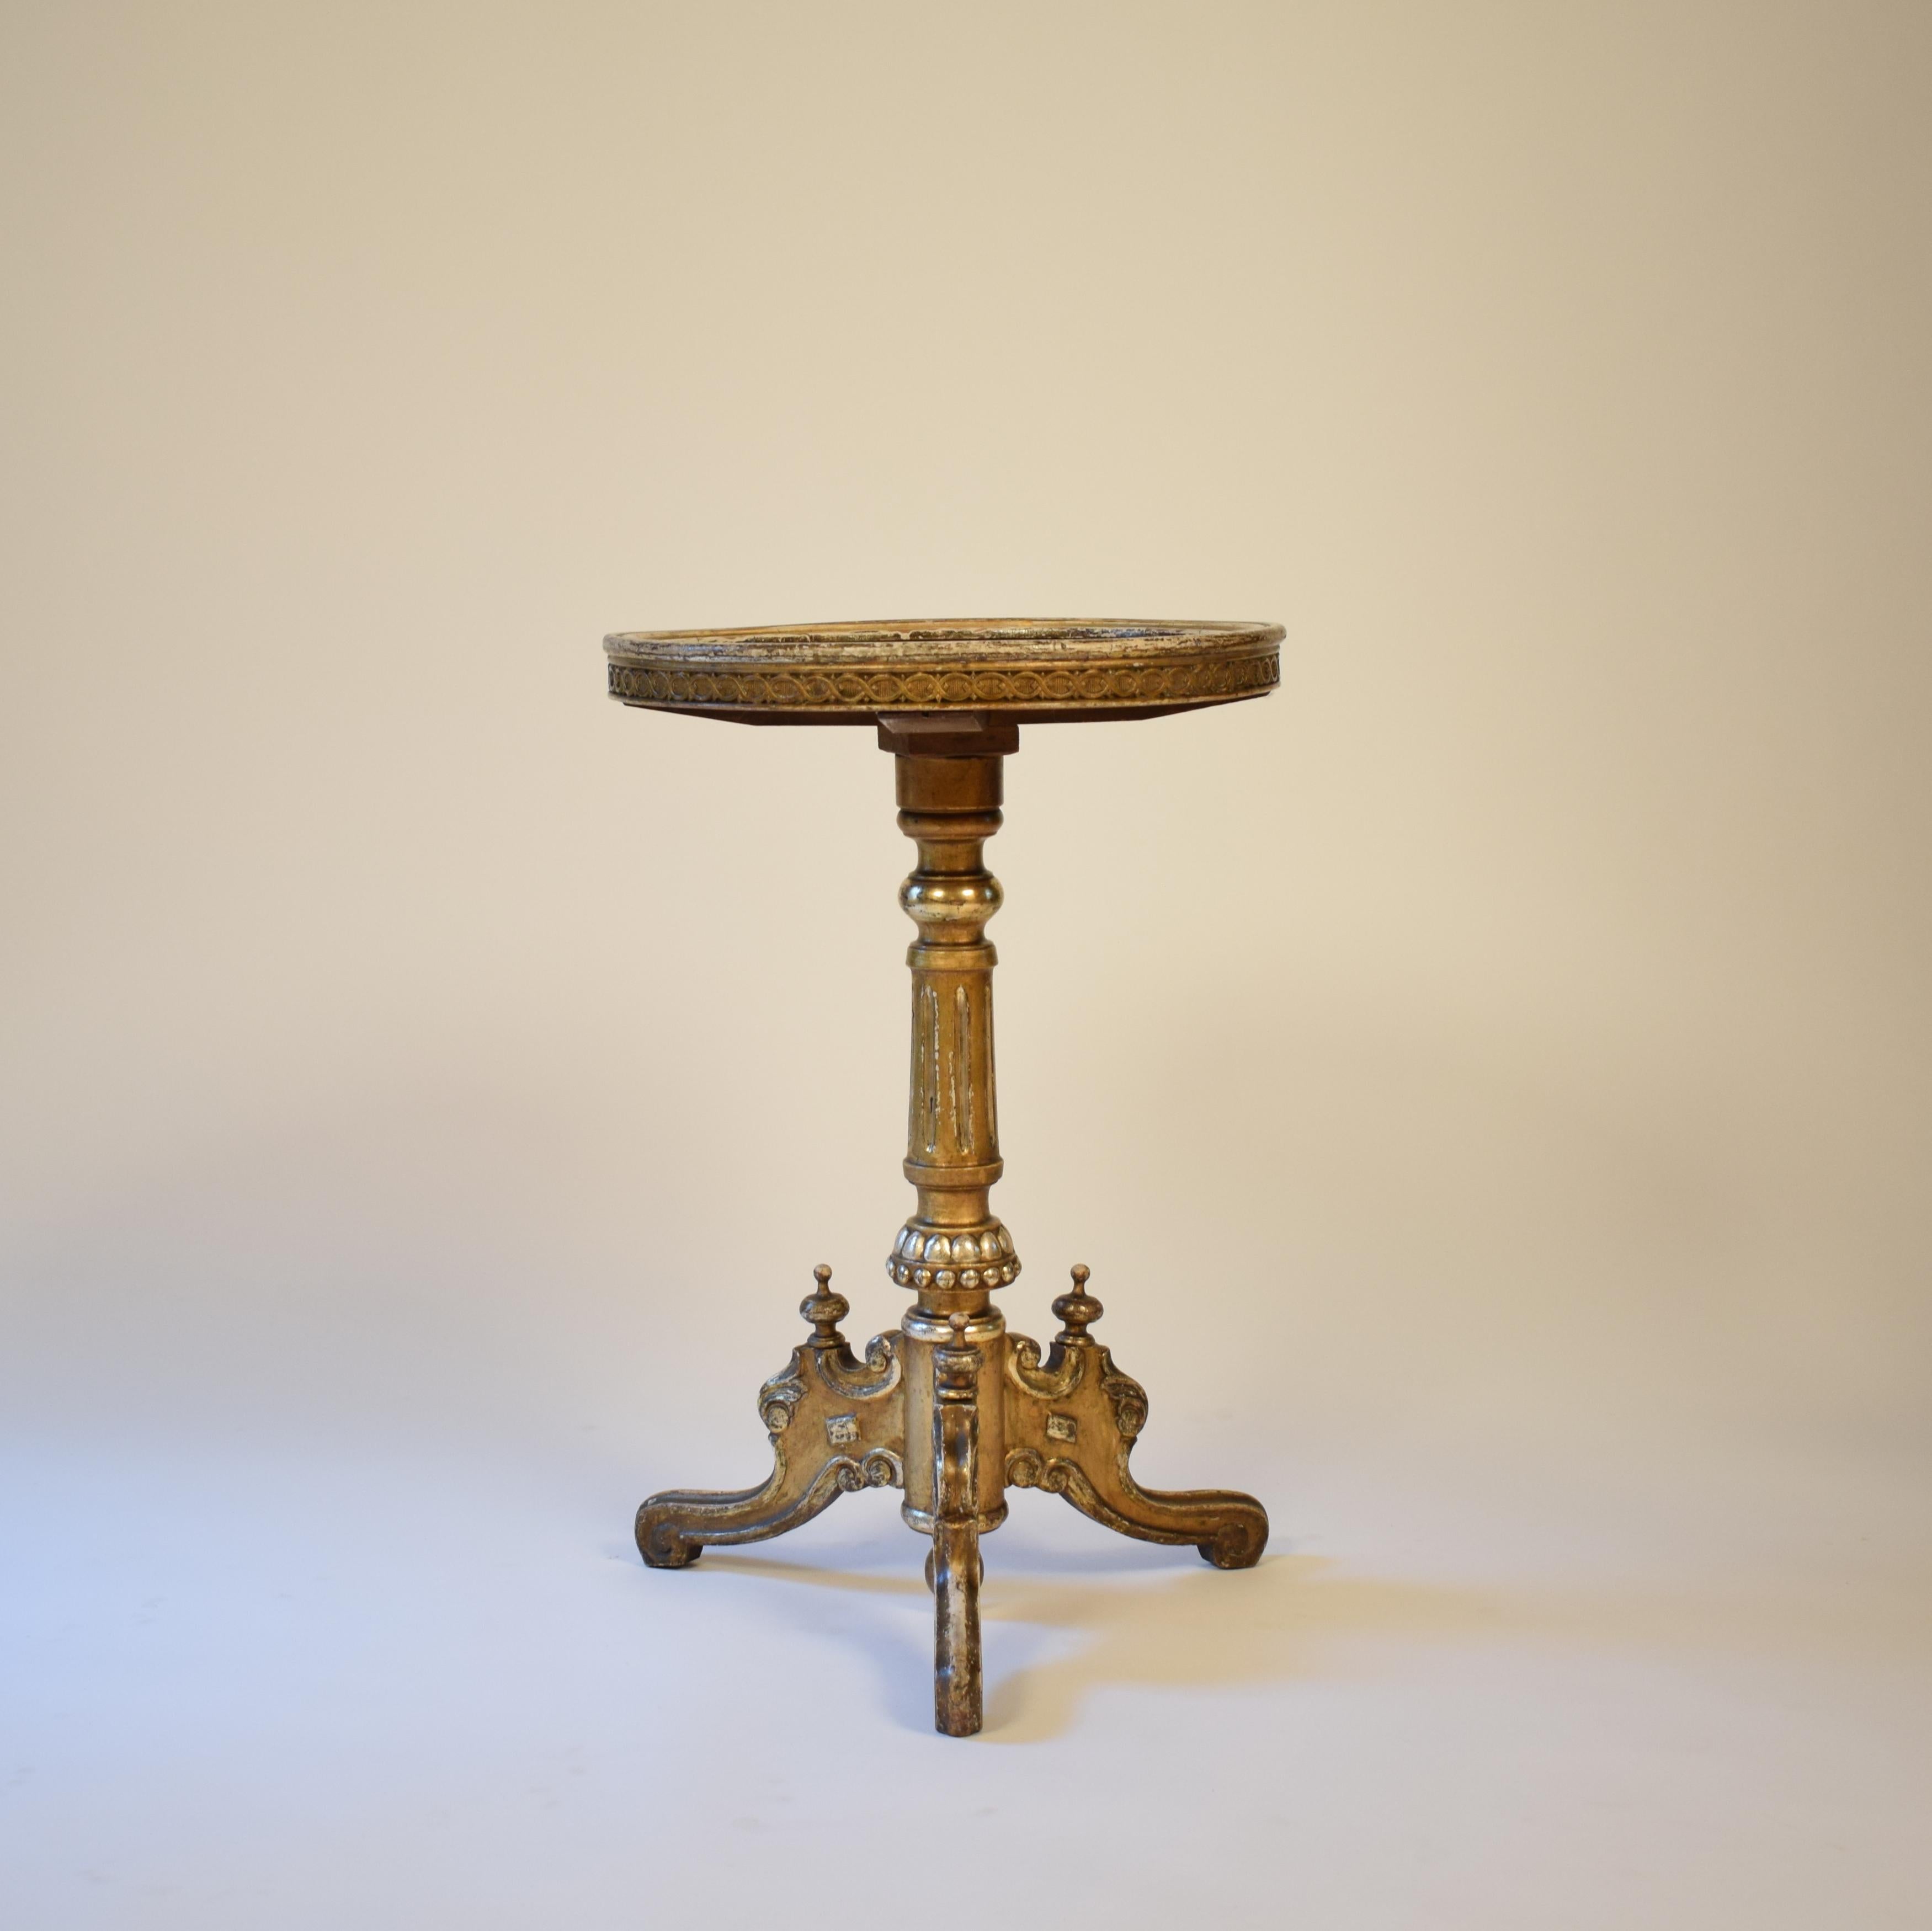 This beautiful and exceptional Victorian gilded side table was build circa 1870 in Germany.
The piece is in its original condition and has a wonderful Patina. Themarquetry is in burr walnut and different fruit woods which is very nice. The round